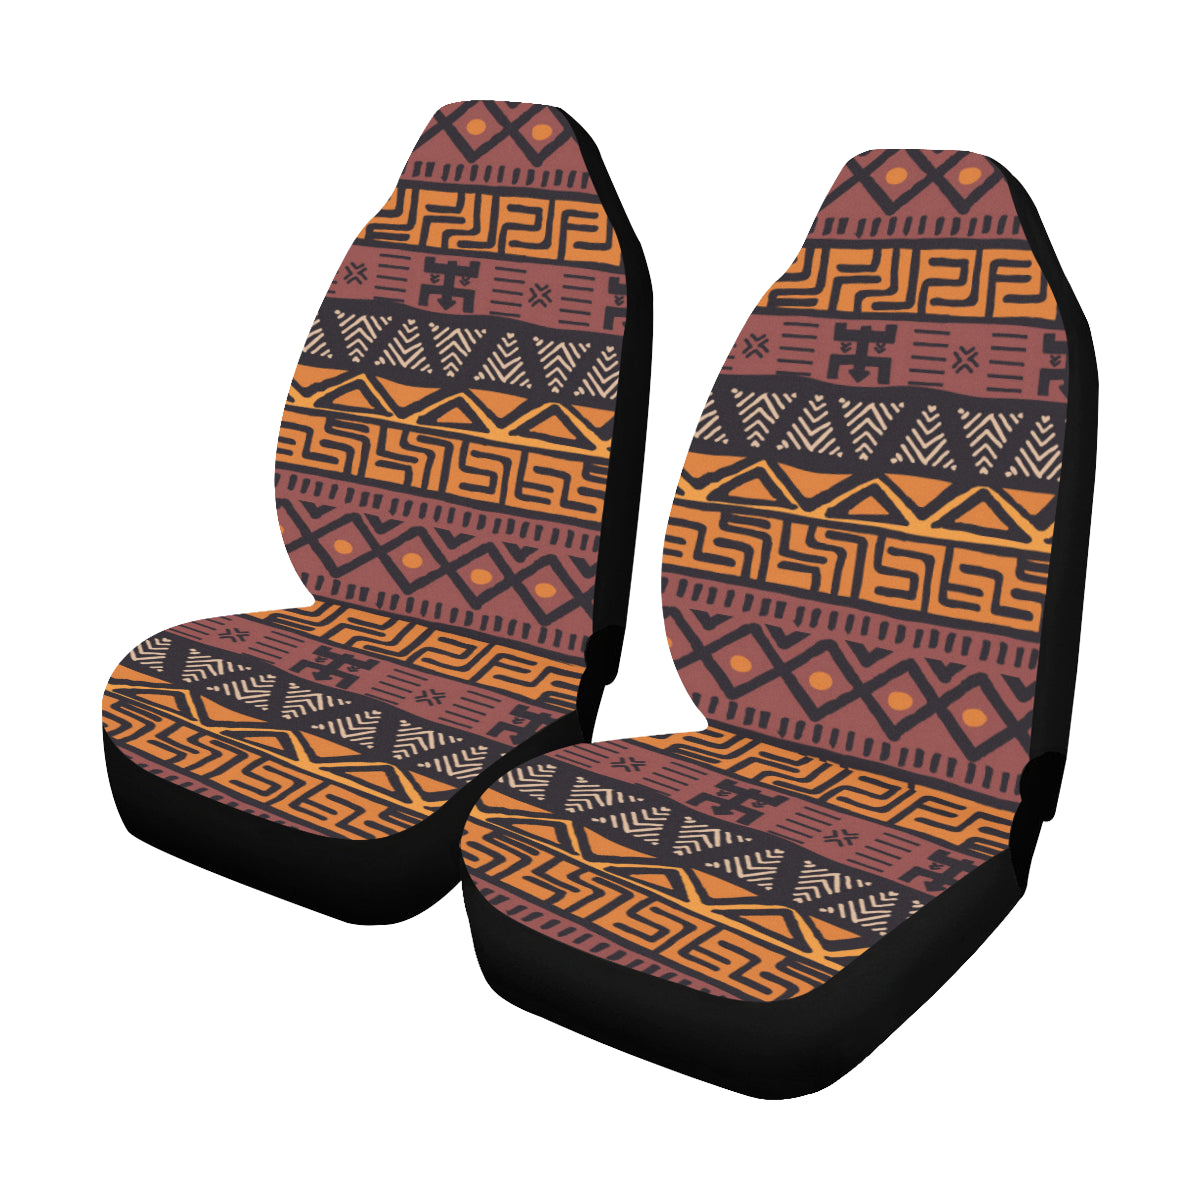 Boho Eye Car Seat Covers, Celestial Seat Cover for Car, Universal